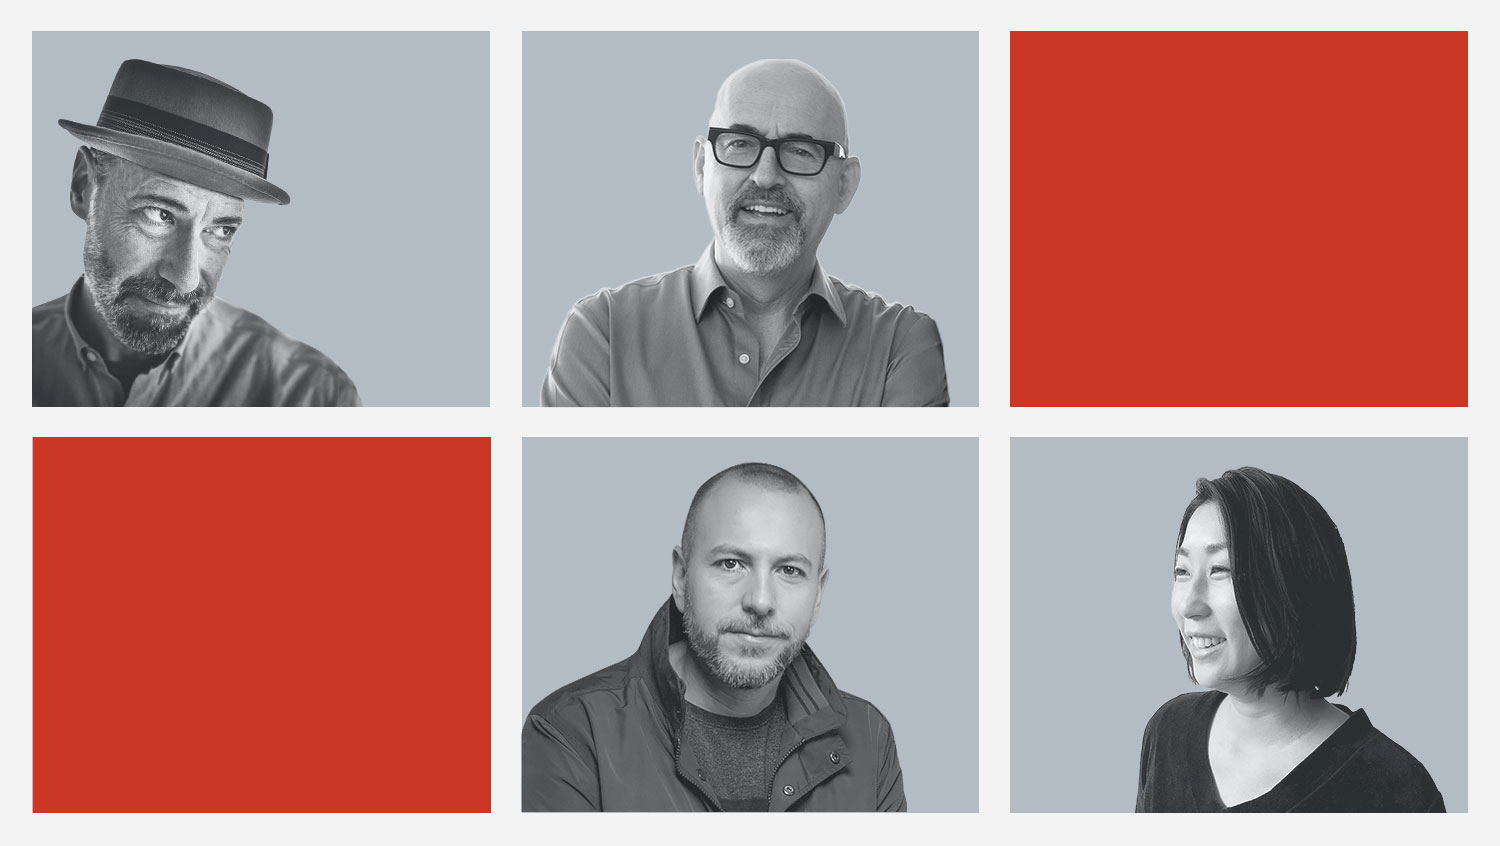 Works Design’s 2020 Sustainability Reporting Trends team of designers: Don Laurie (top left), Kevin Ward (top right), Nelson Silva (bottom left) and Chie Momota (bottom right)